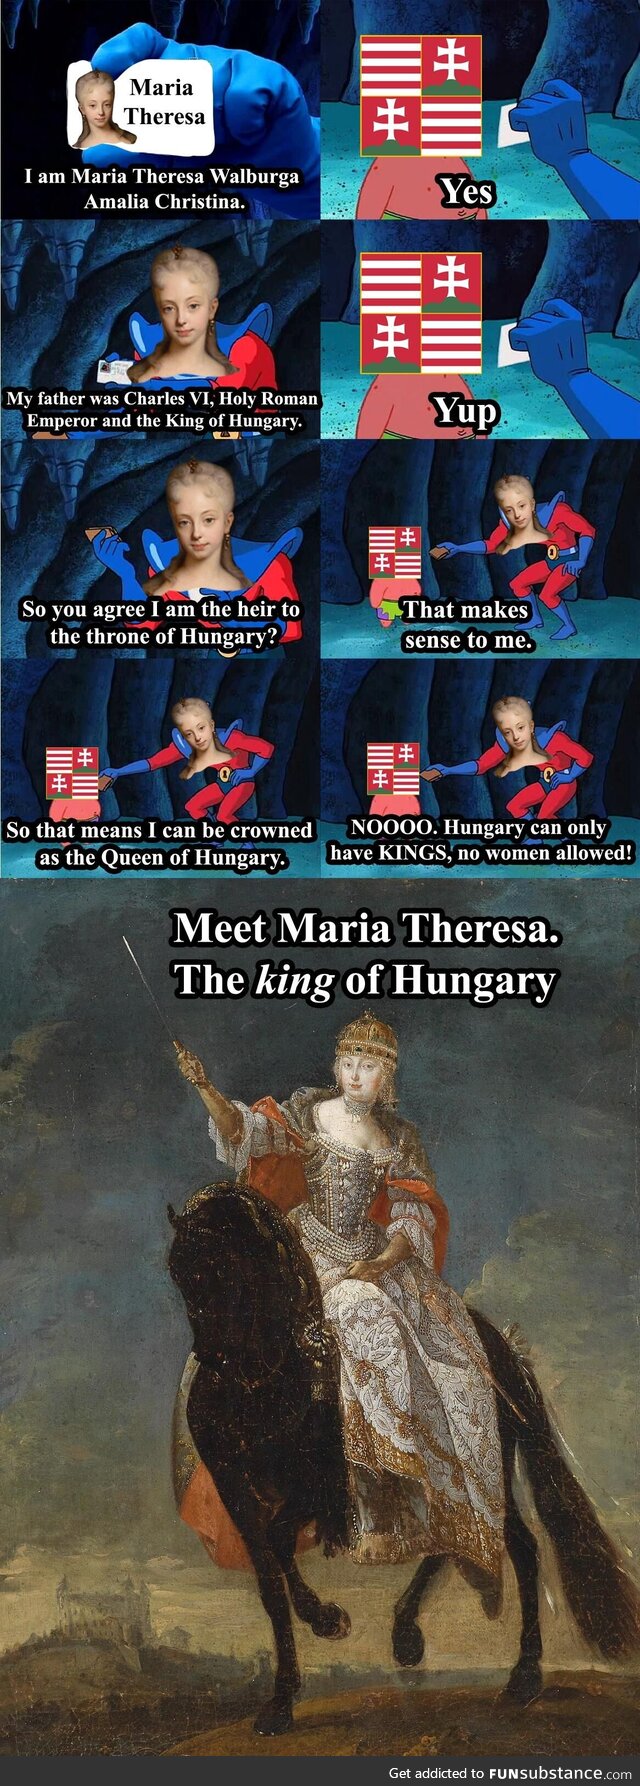 Maria Theresa had to be crowned as the 'King' of Hungary because there was no provision